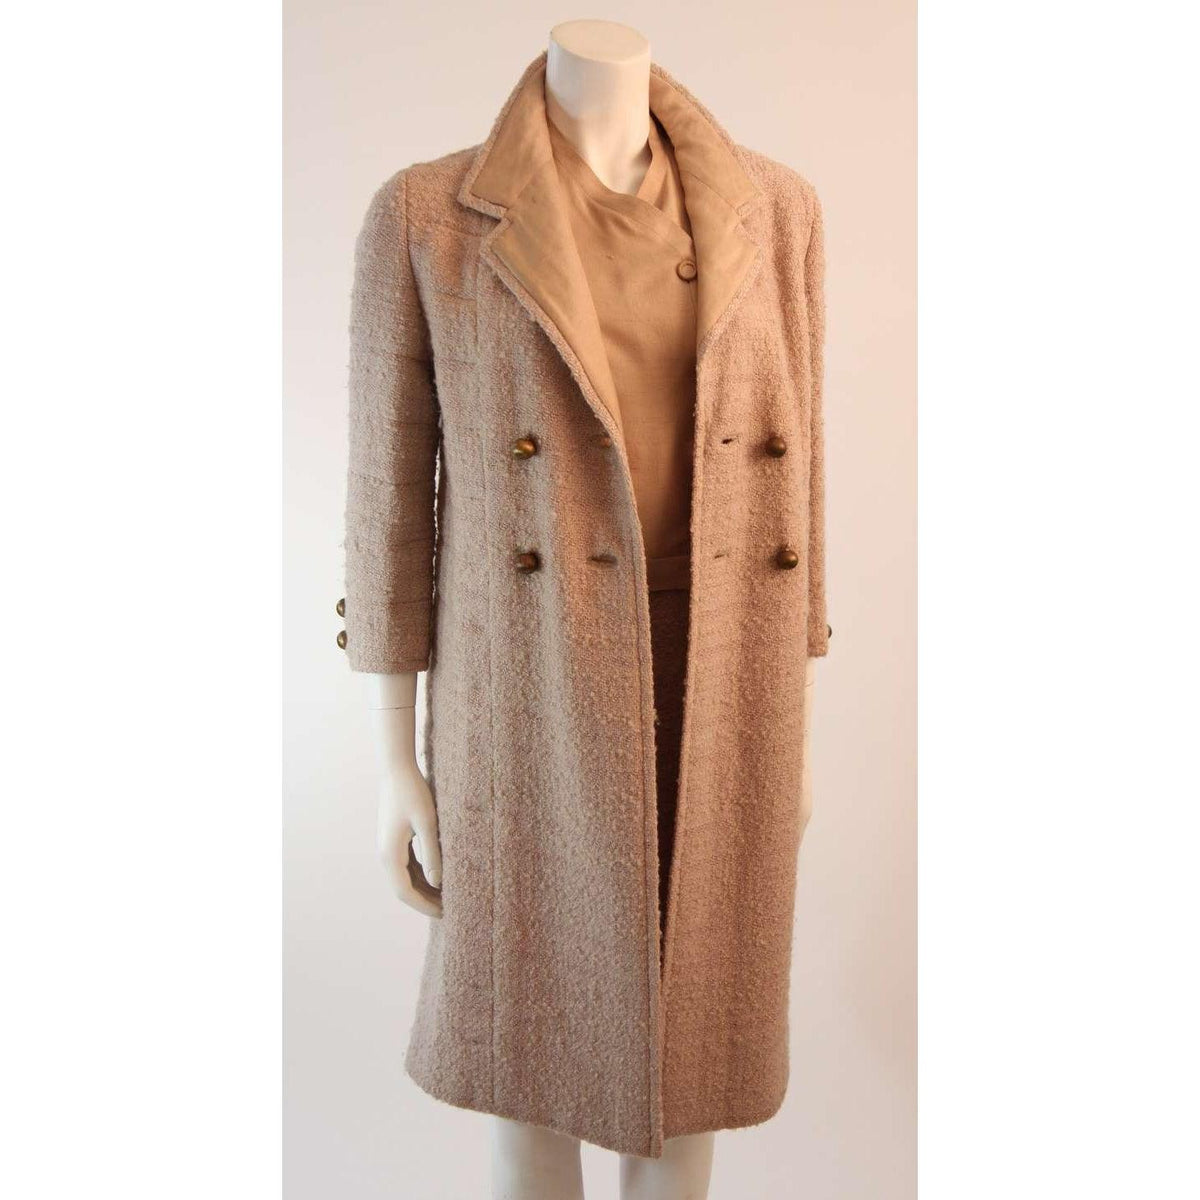 Pre-Owned CHANEL 1960s Attributed to Chanel Cream Boucle 3 pc Tweed Suit | Size 37 - theREMODA